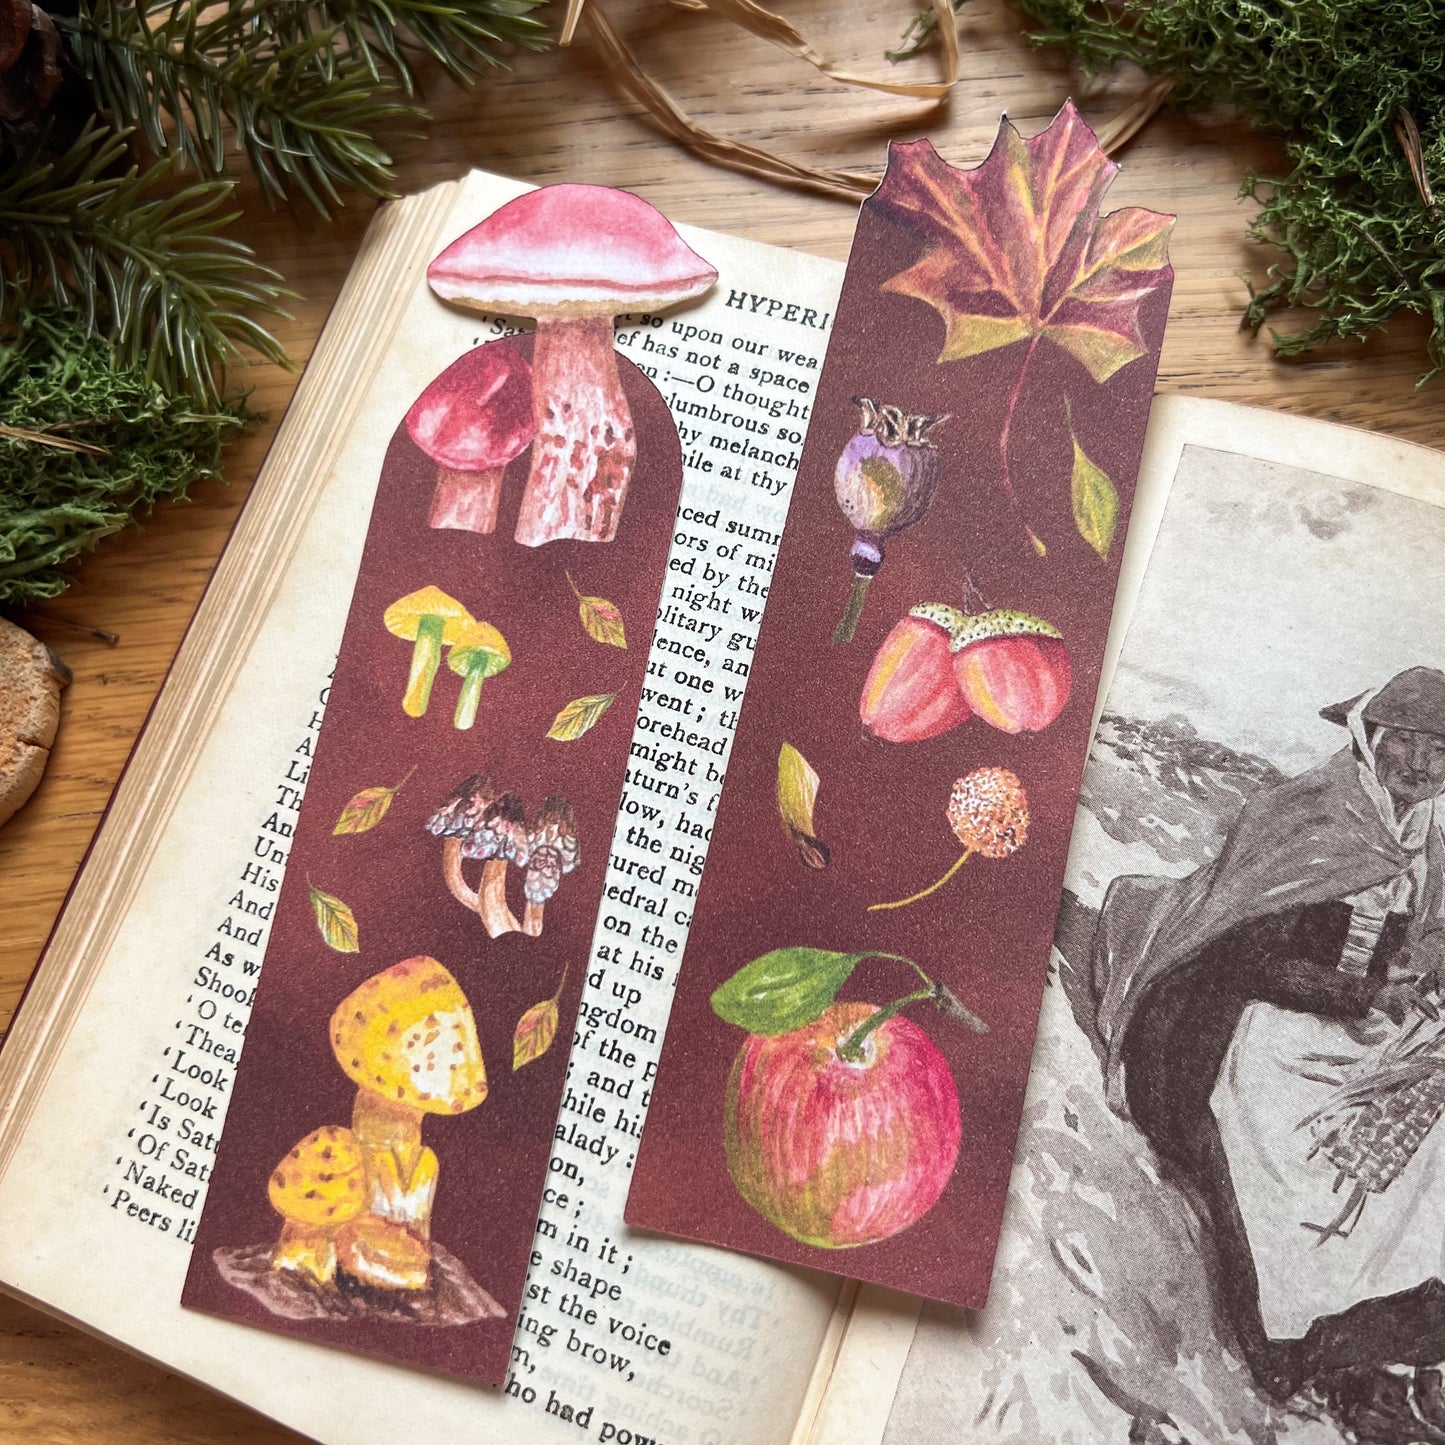 Fall Forage and Woodland Walk bookmarks sat on an open poetry book, resting in a wooden desk decorated with green moss and straw